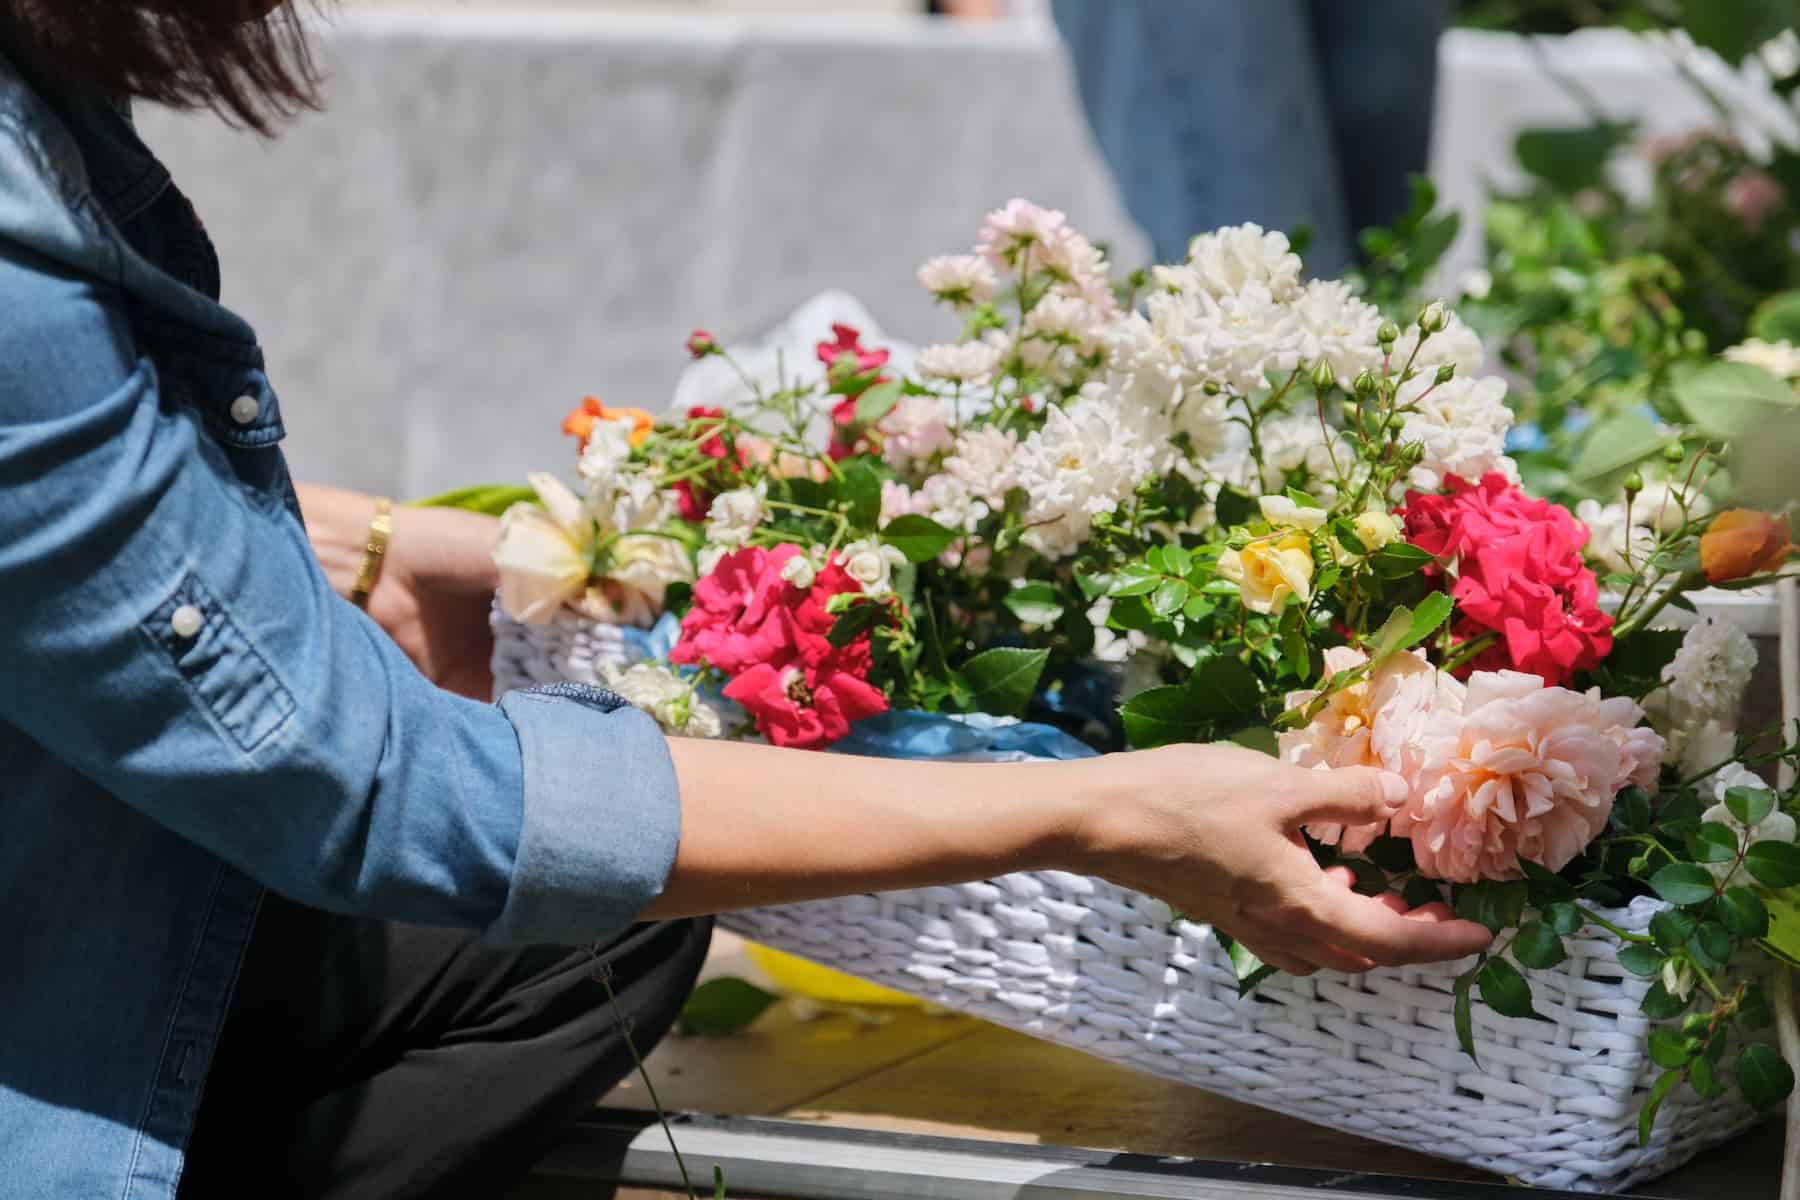 Regional Trends in Eco-Friendliness That Can Affect Funeral Services